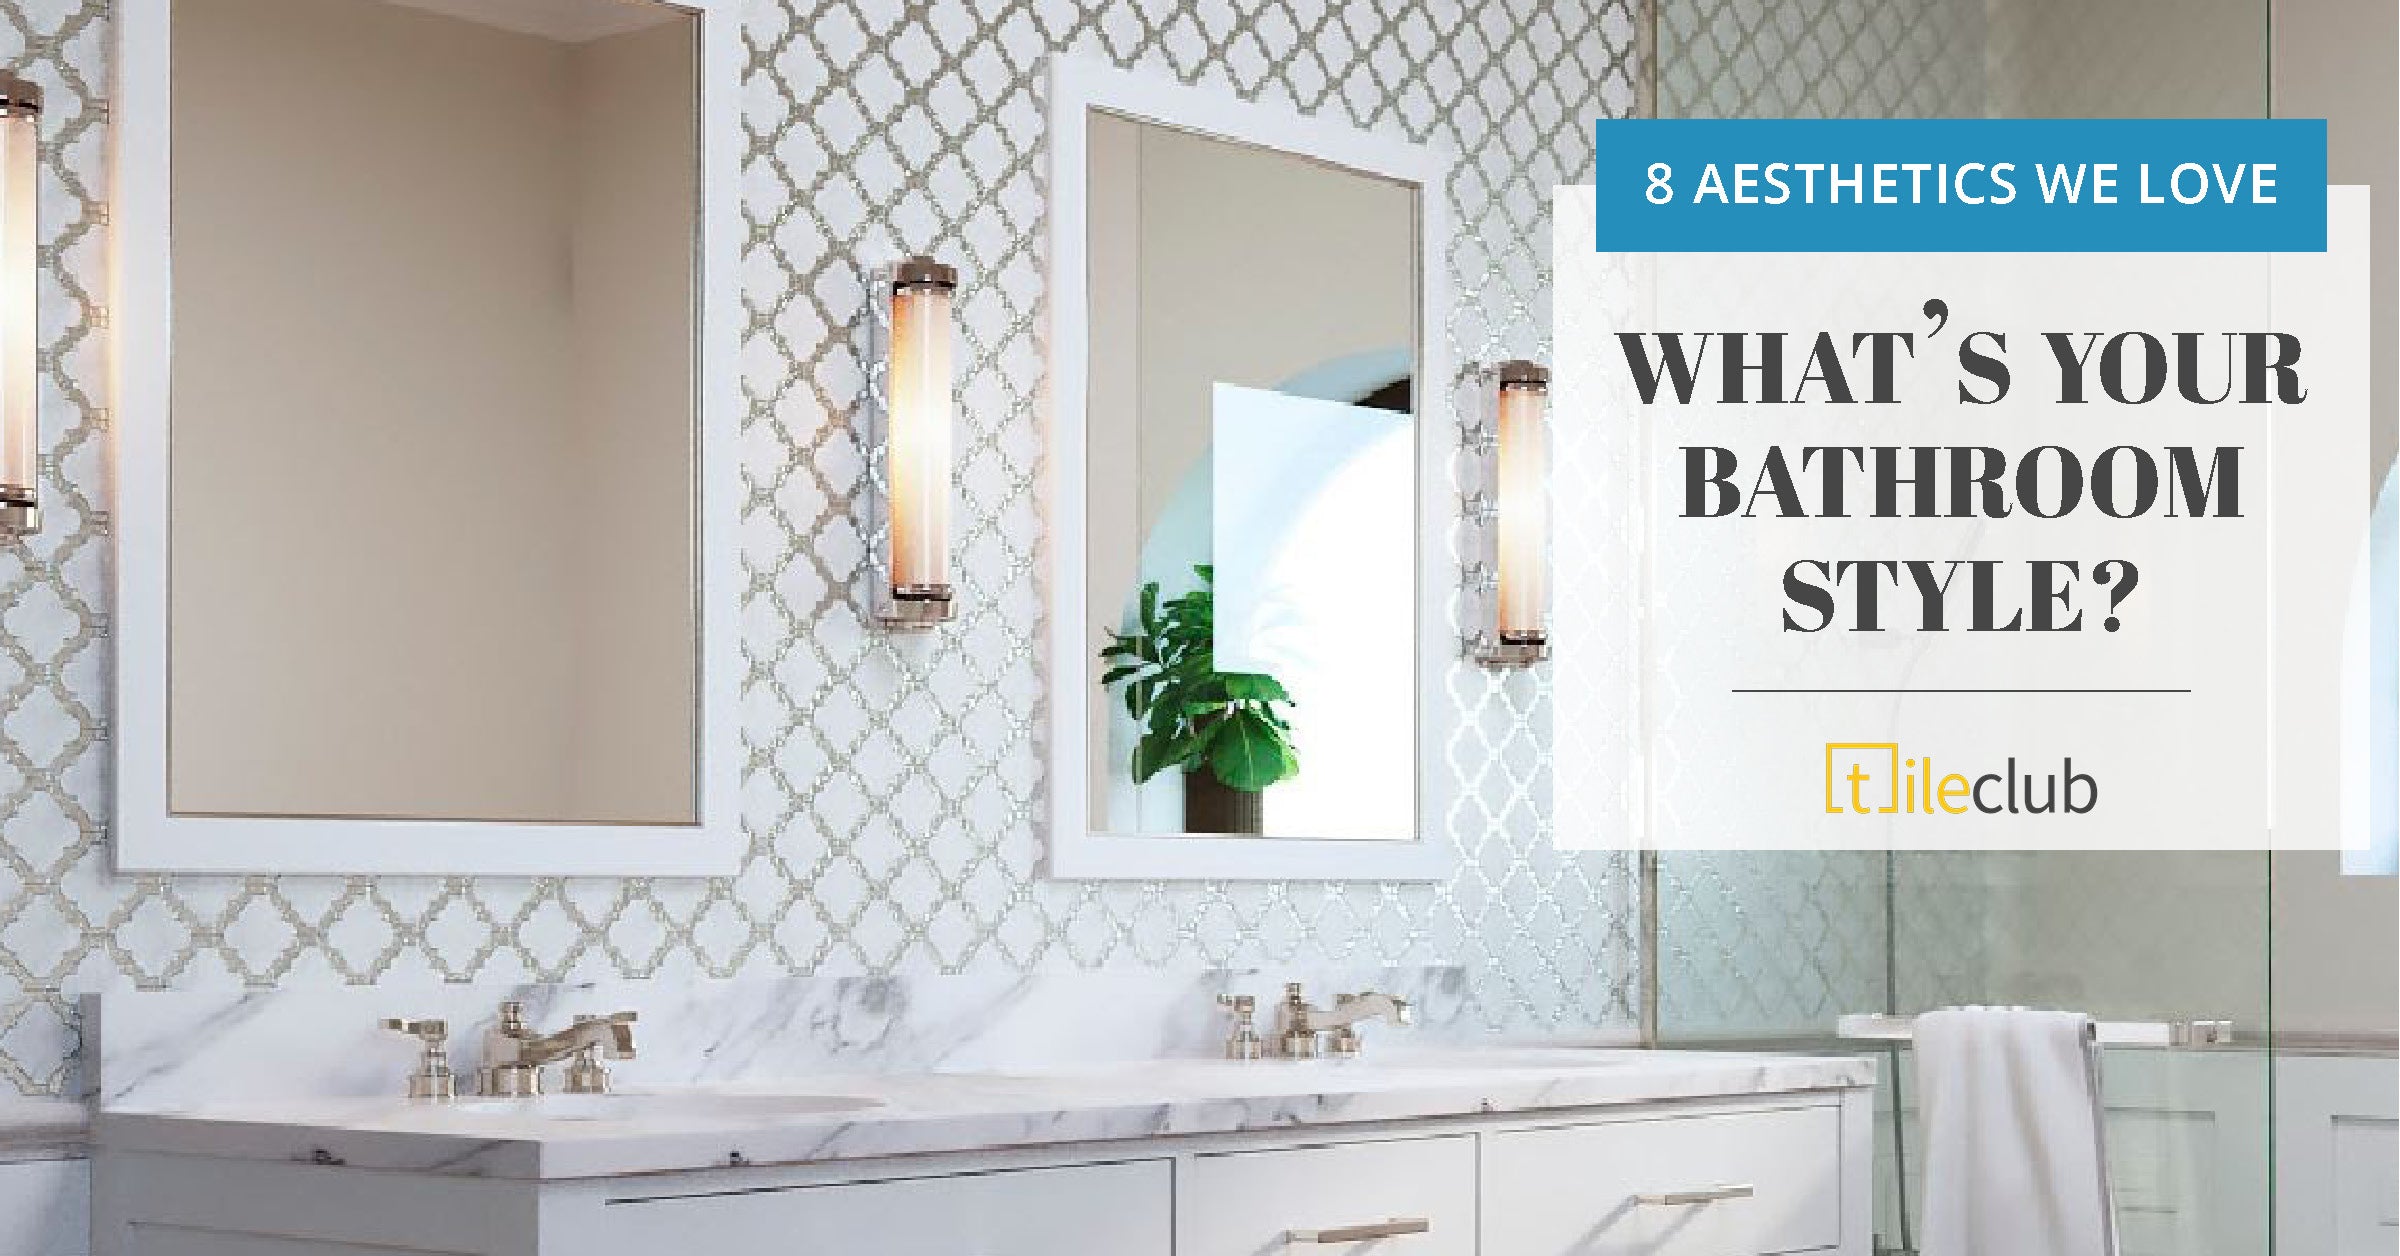 8 Dream Bathroom Styles for your Next Remodel